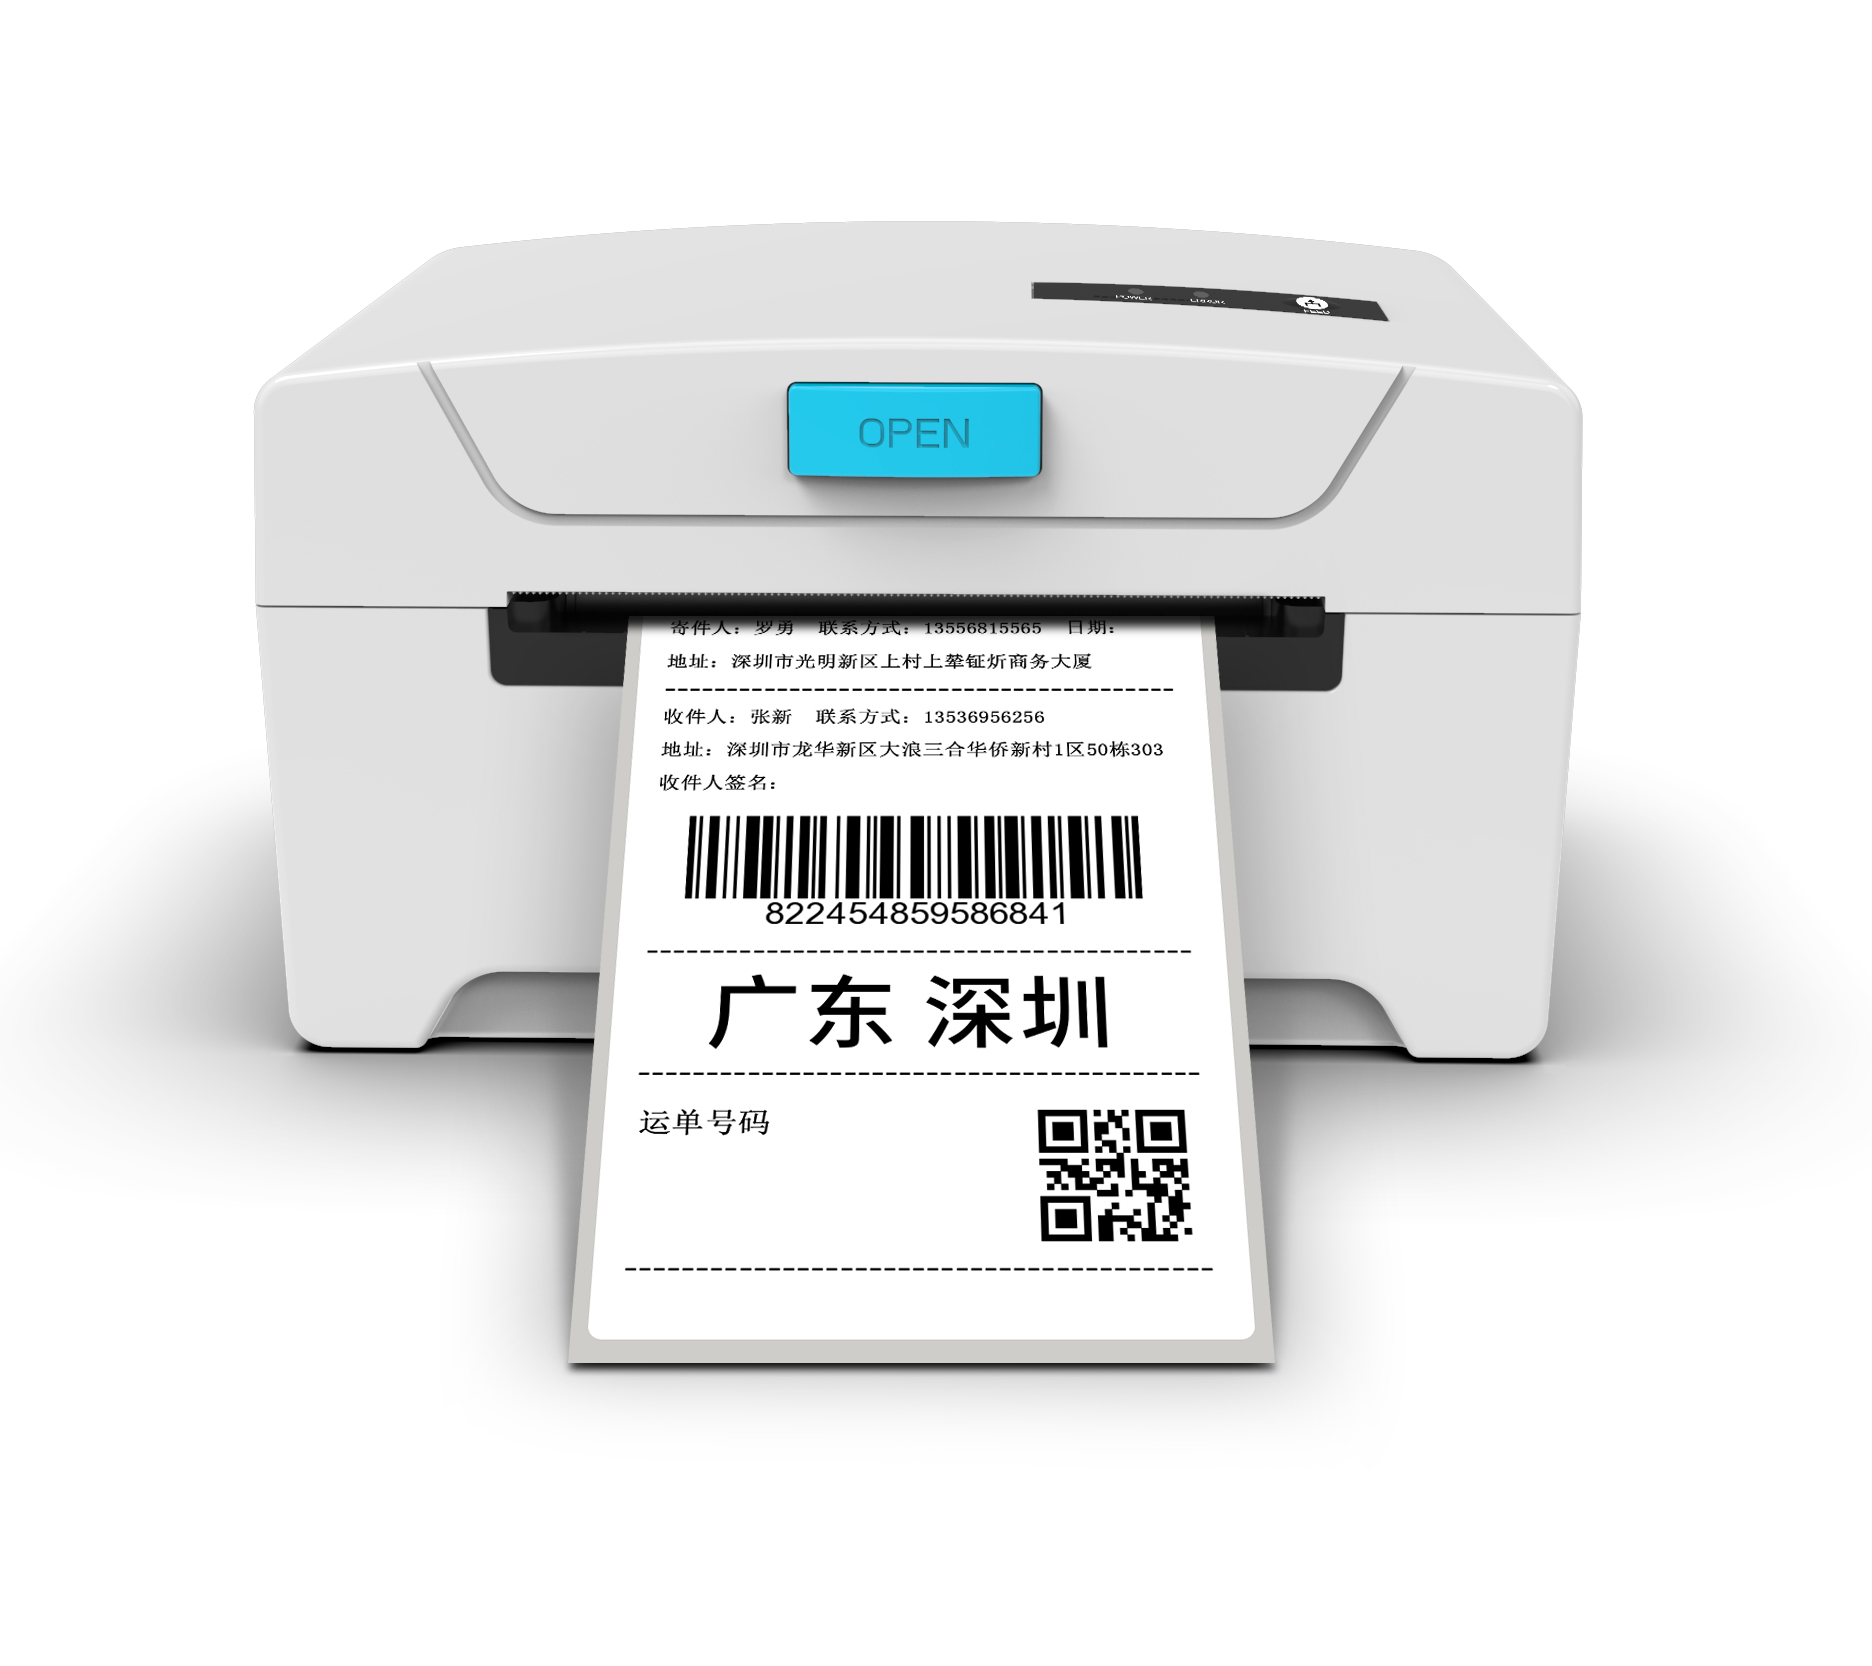 OCBP-013 High speed 203dpi barcode label printer shipping mark thermal sticker printer with label roll stand